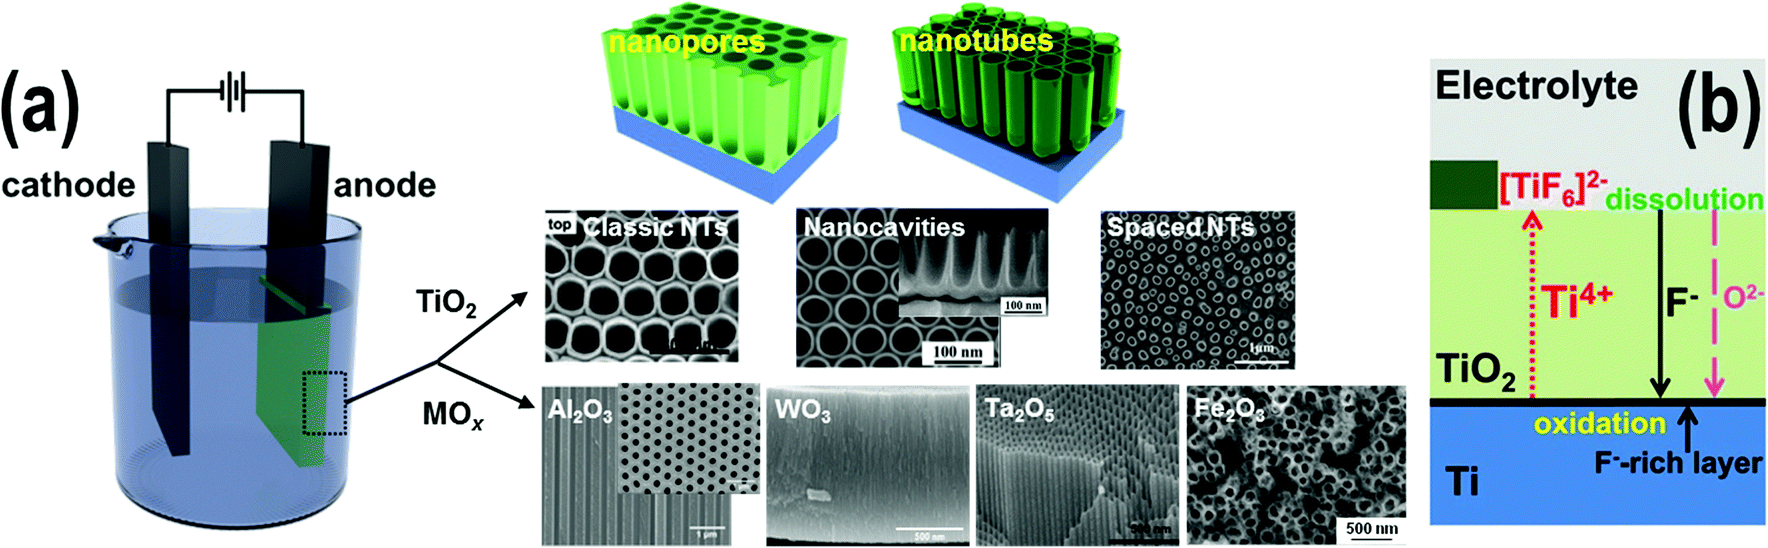 Photoanodes based on TiO 2 and α-Fe 2 O 3 for solar water 